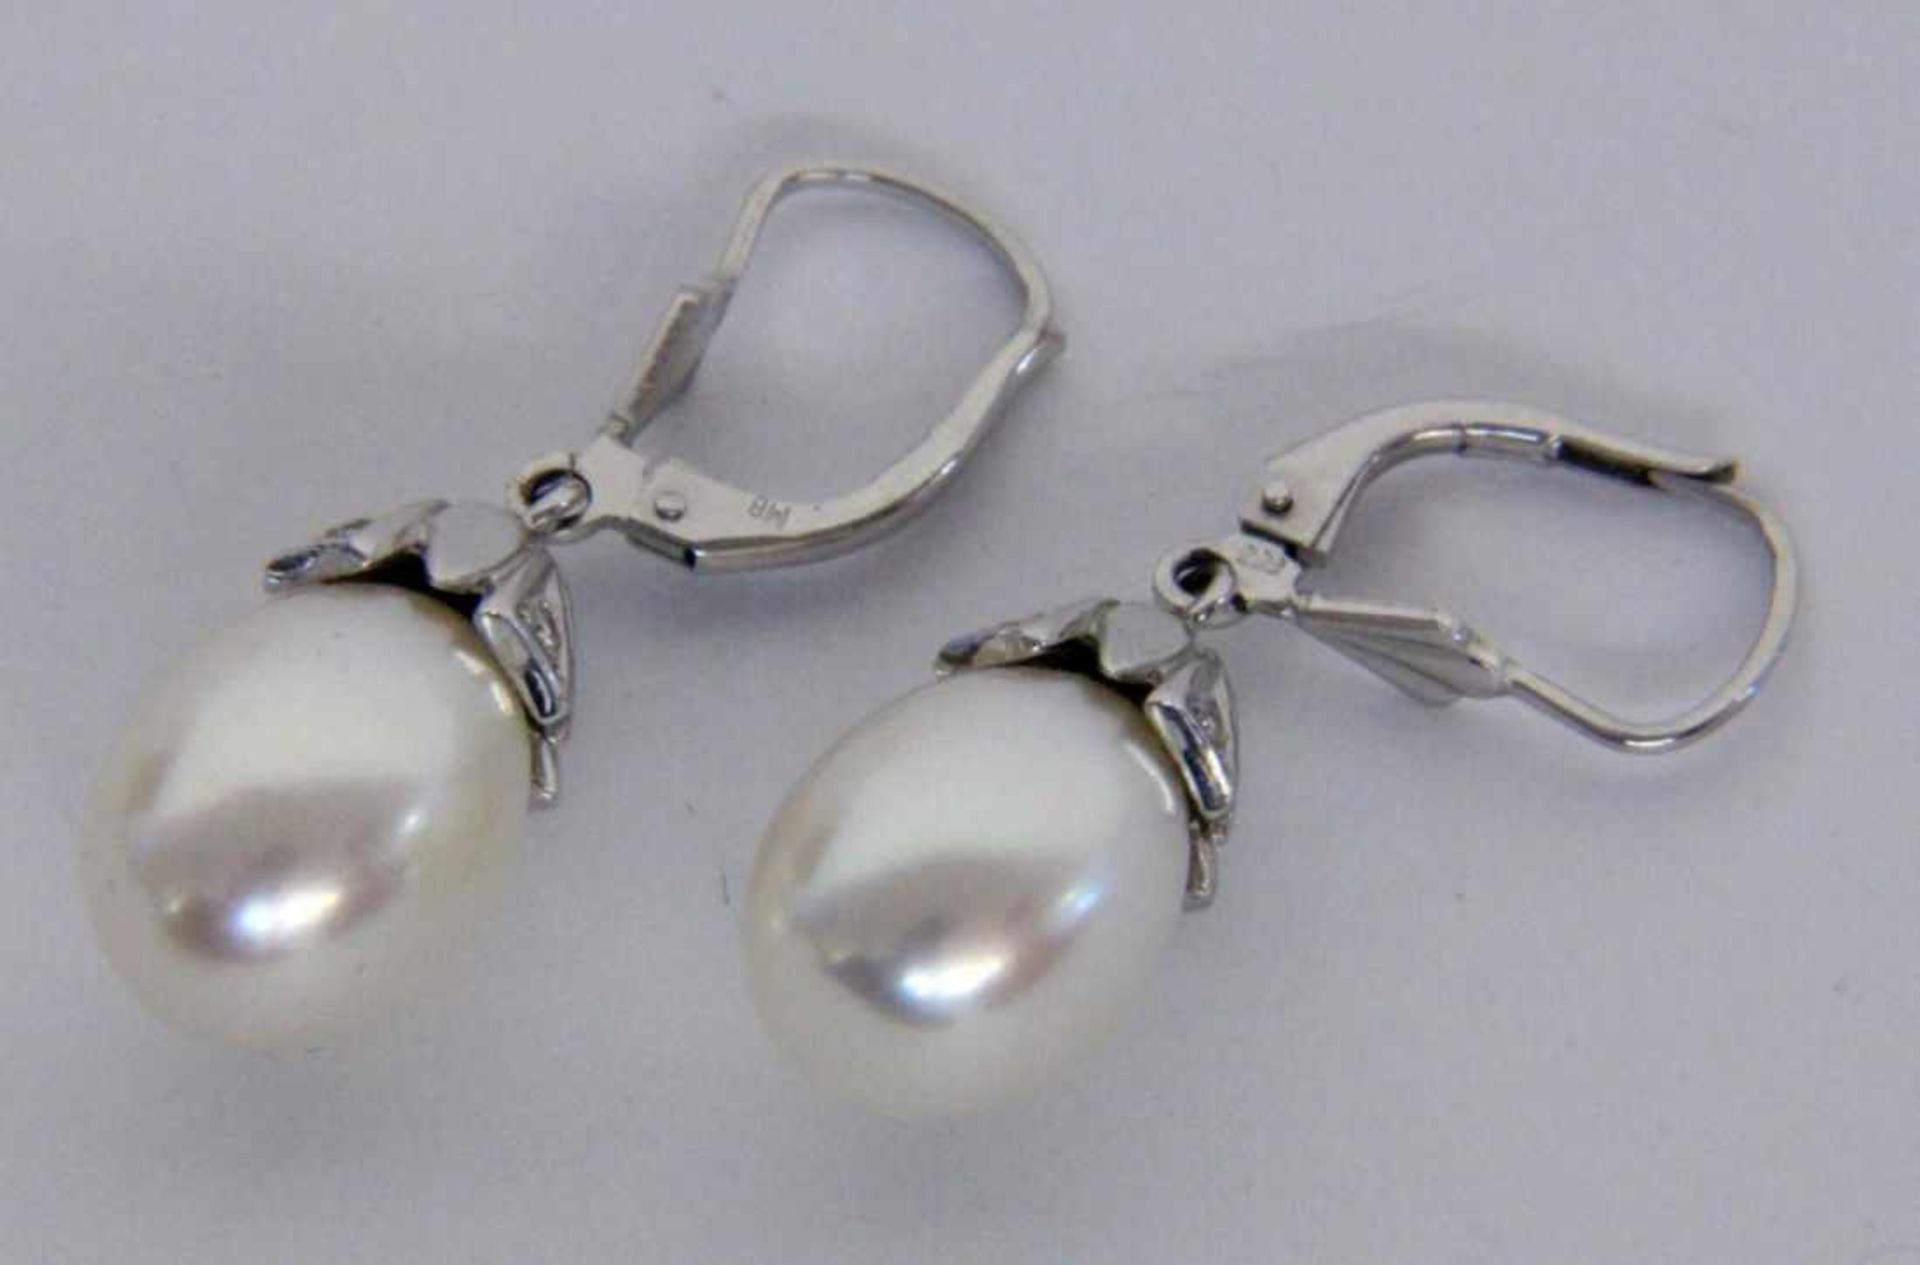 ''A PAIR OF DROP EARRINGS 585/000 white gold with fine cultured pearls measuring